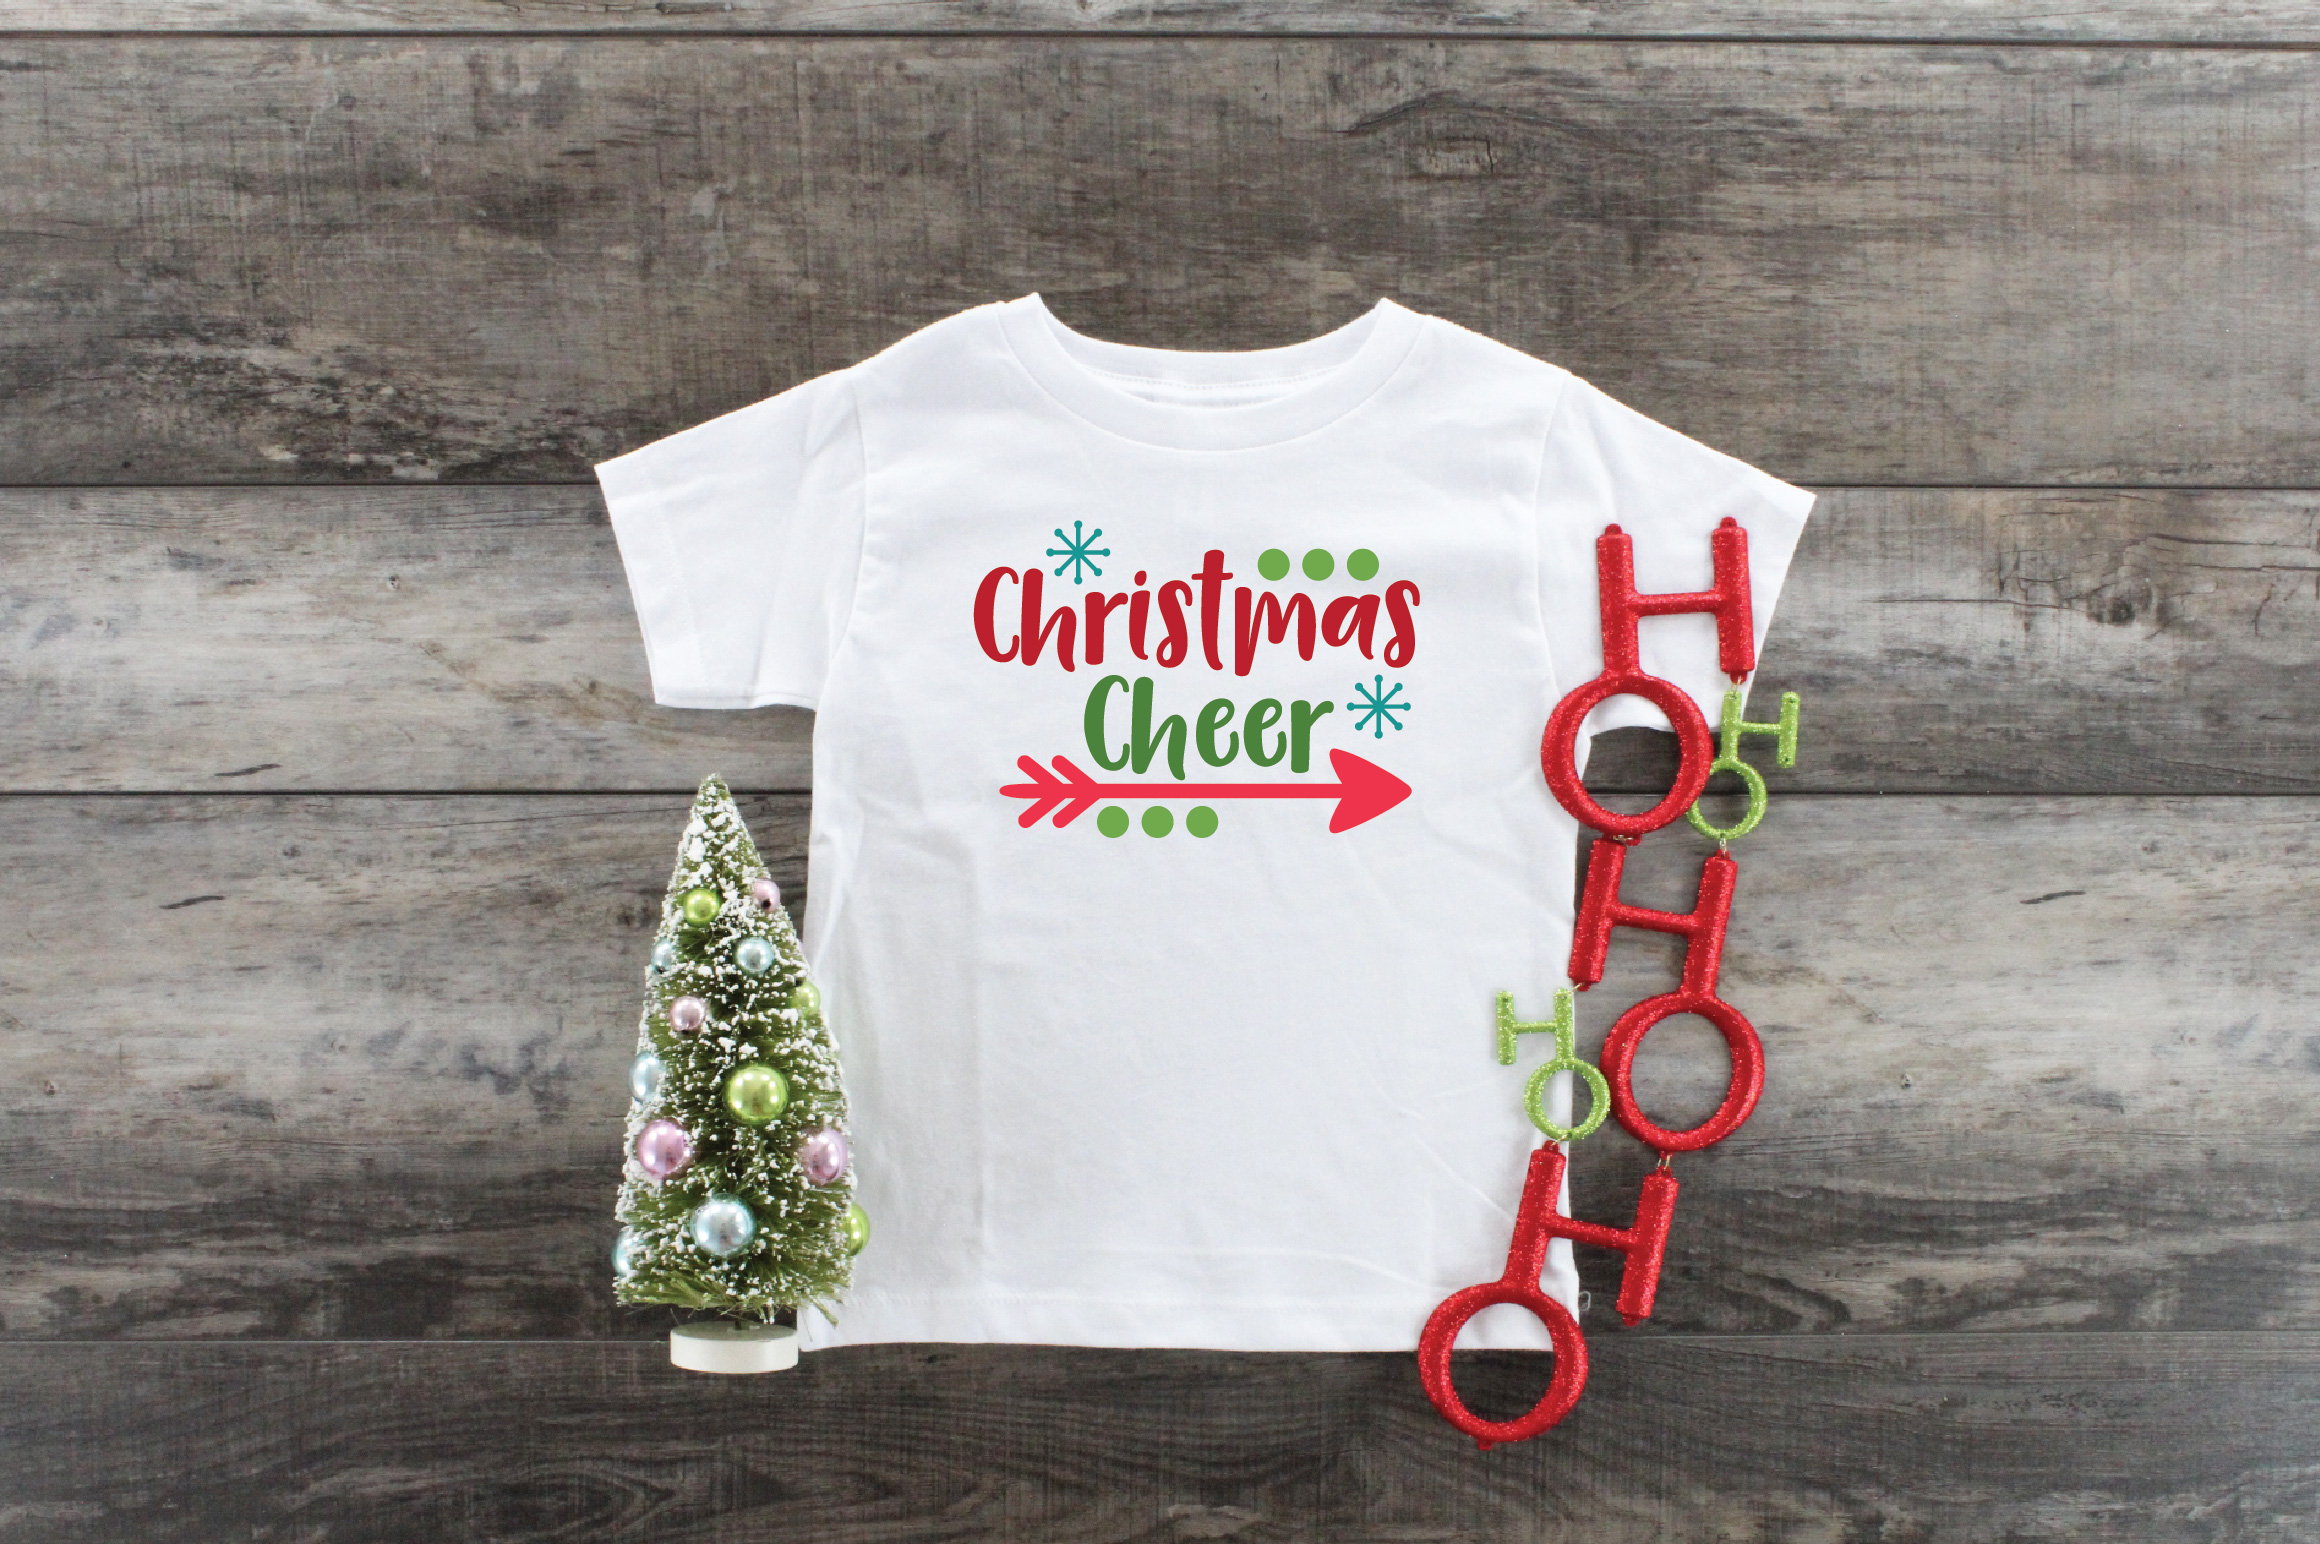 Download Christmas Cheer - Christmas SVG Cut File - DXF PNG EPS JPG ...